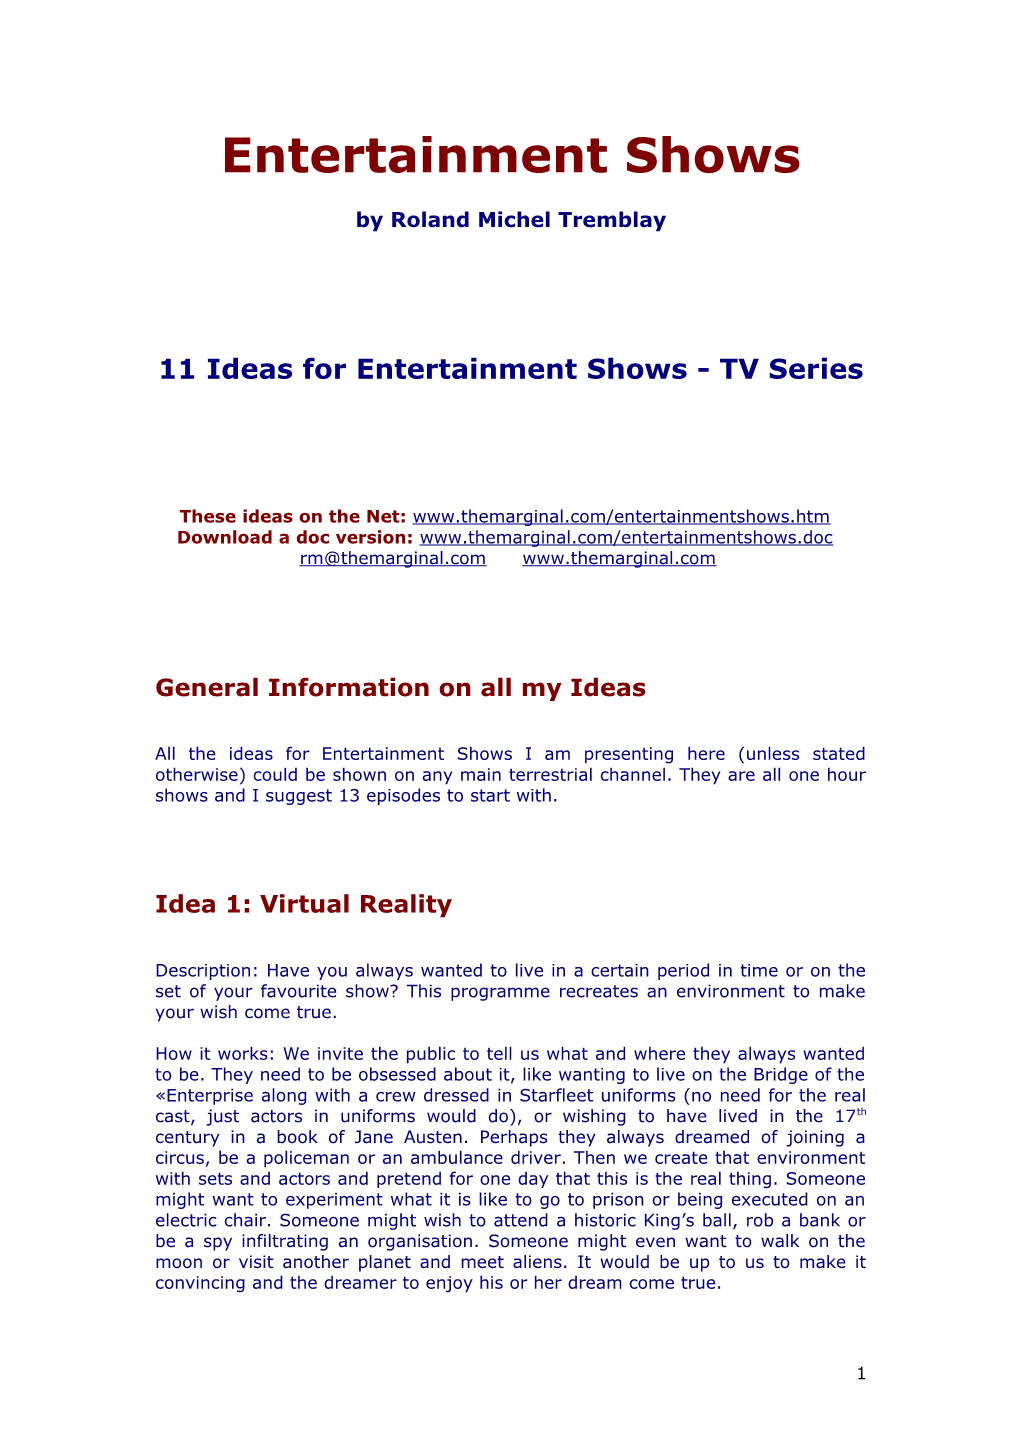 11 Ideas for Entertainment Shows - TV Series